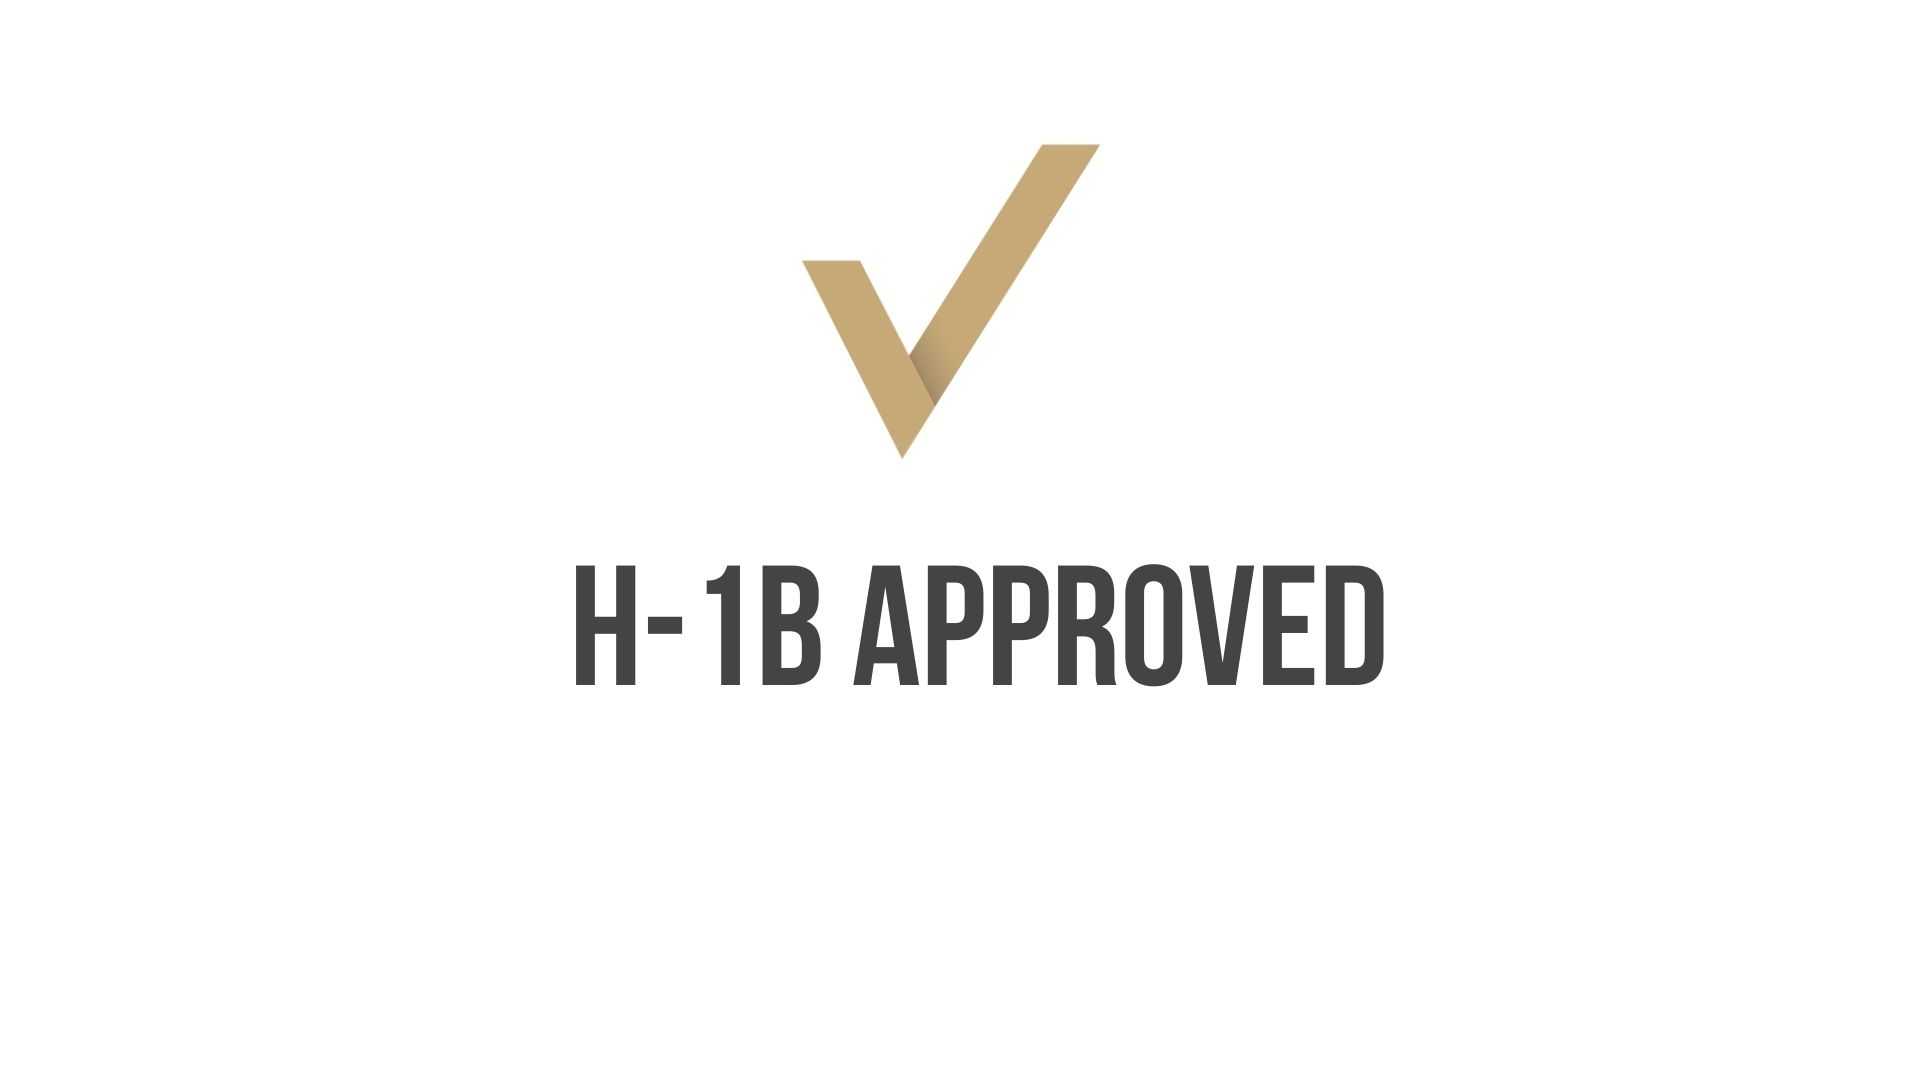 Fast H-1B Change of Status Approval With Premium Processing